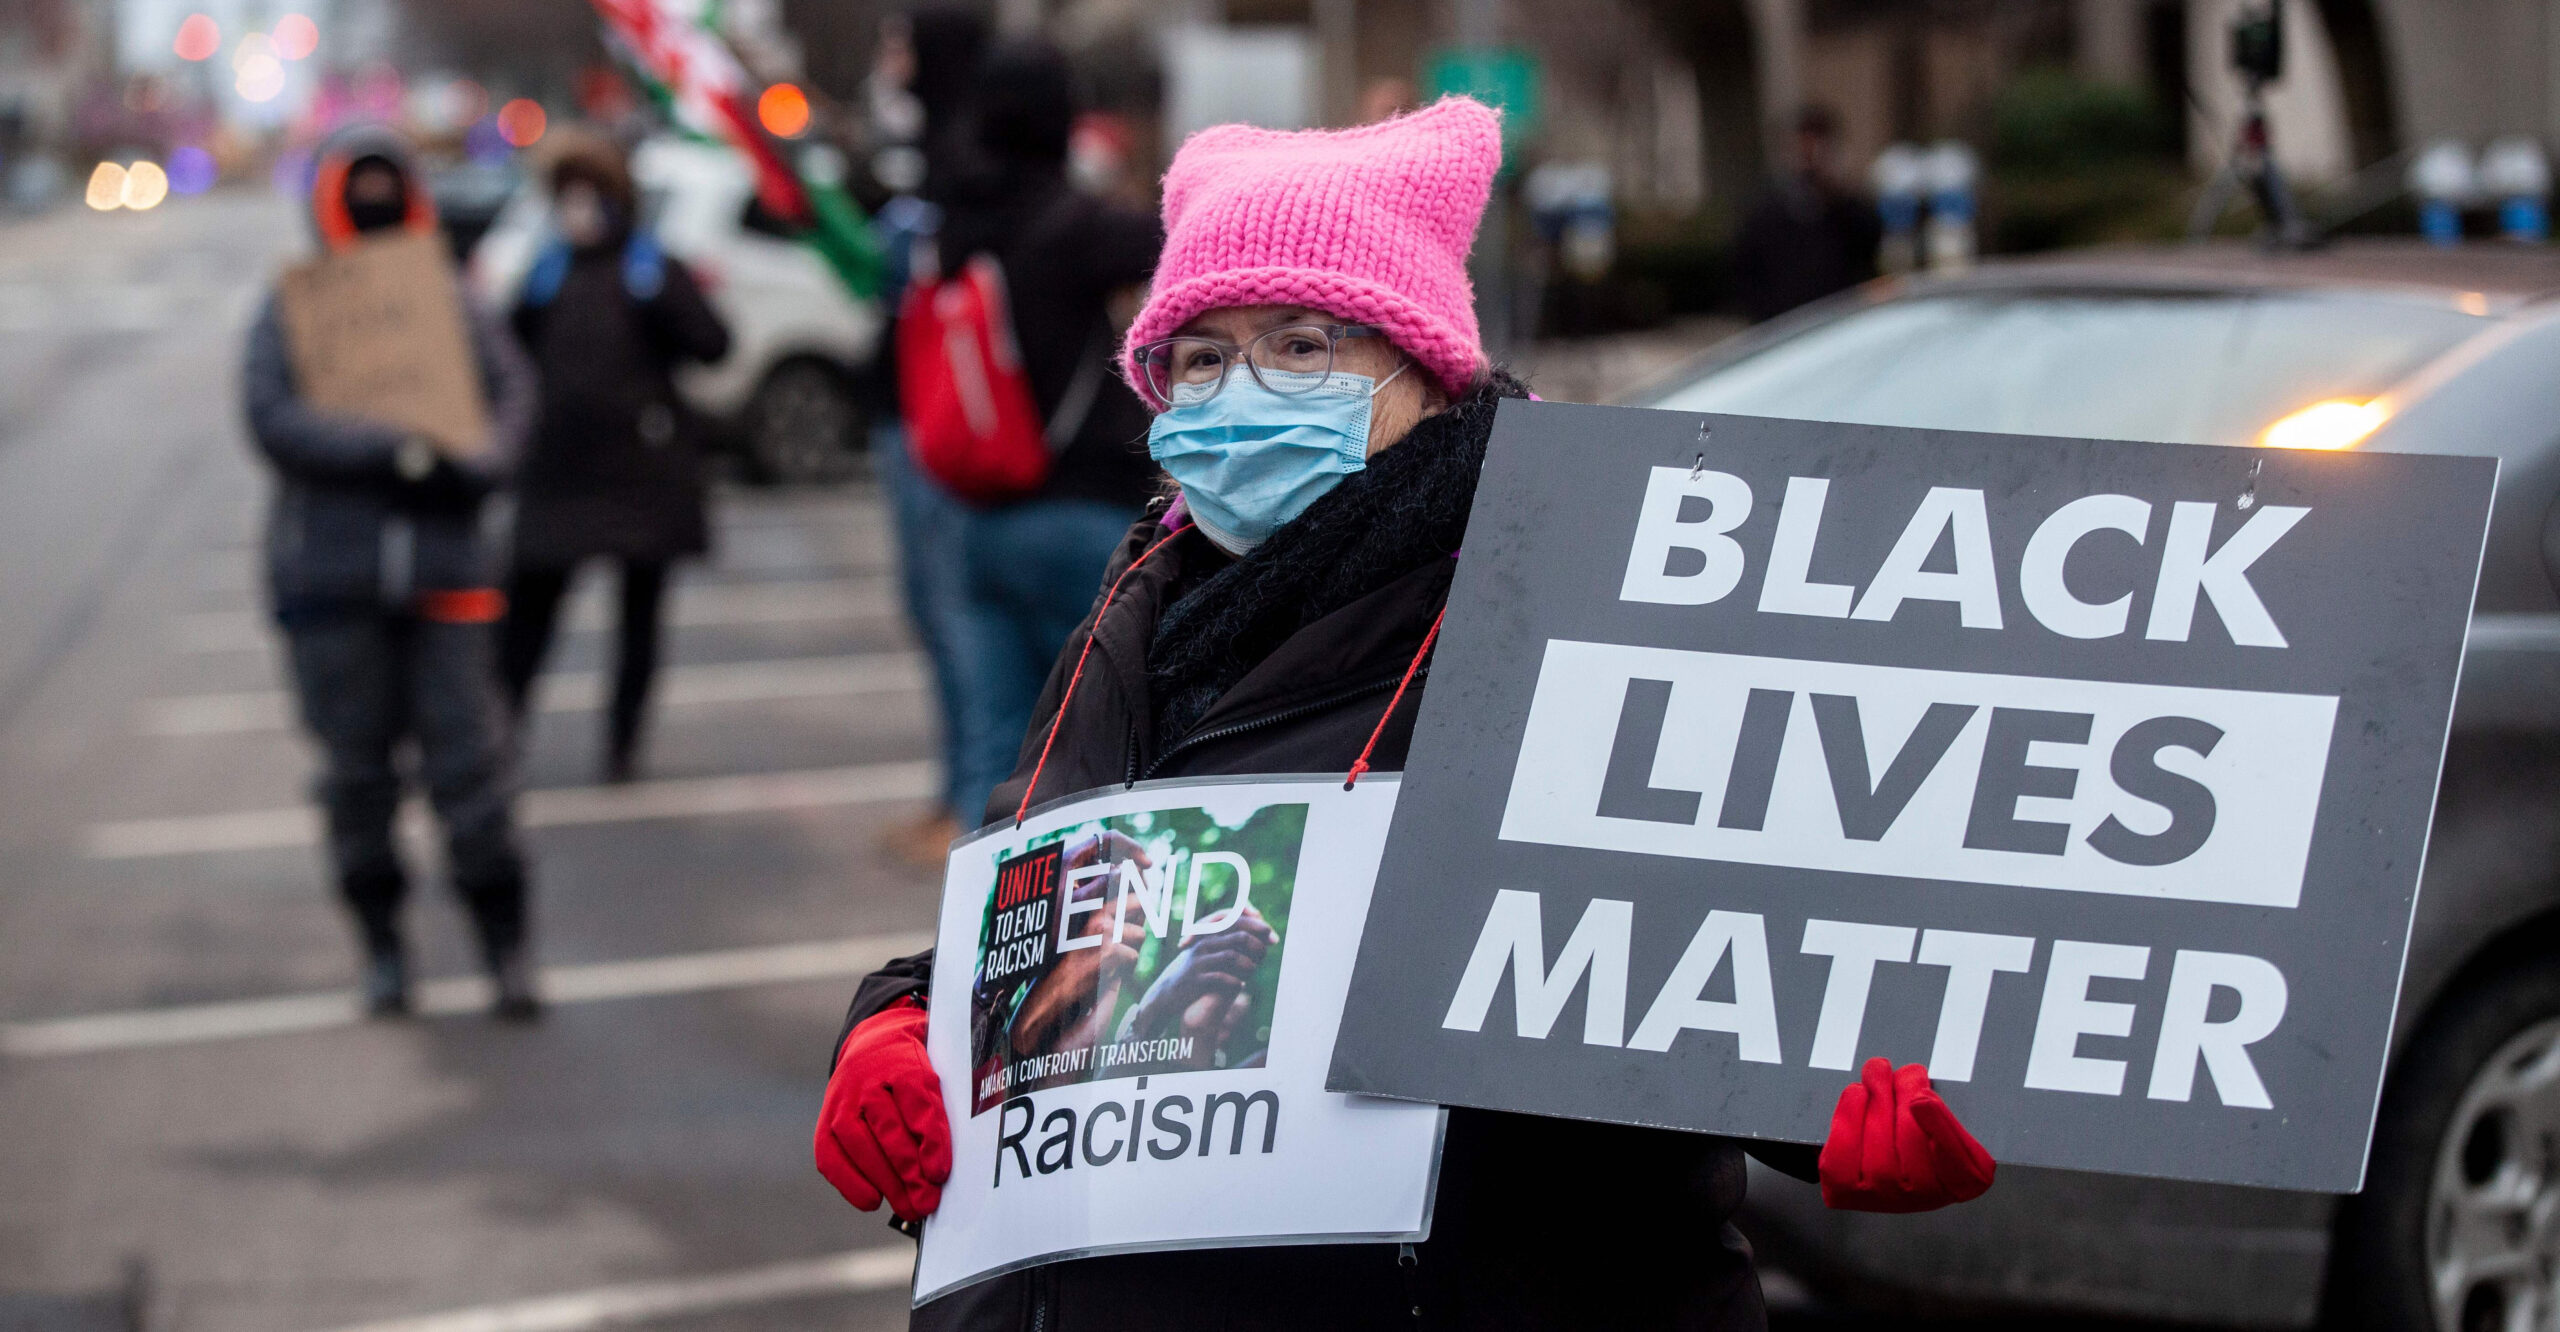 Critical Race Theory Weakens Society and Breeds Hate, Minorities Say